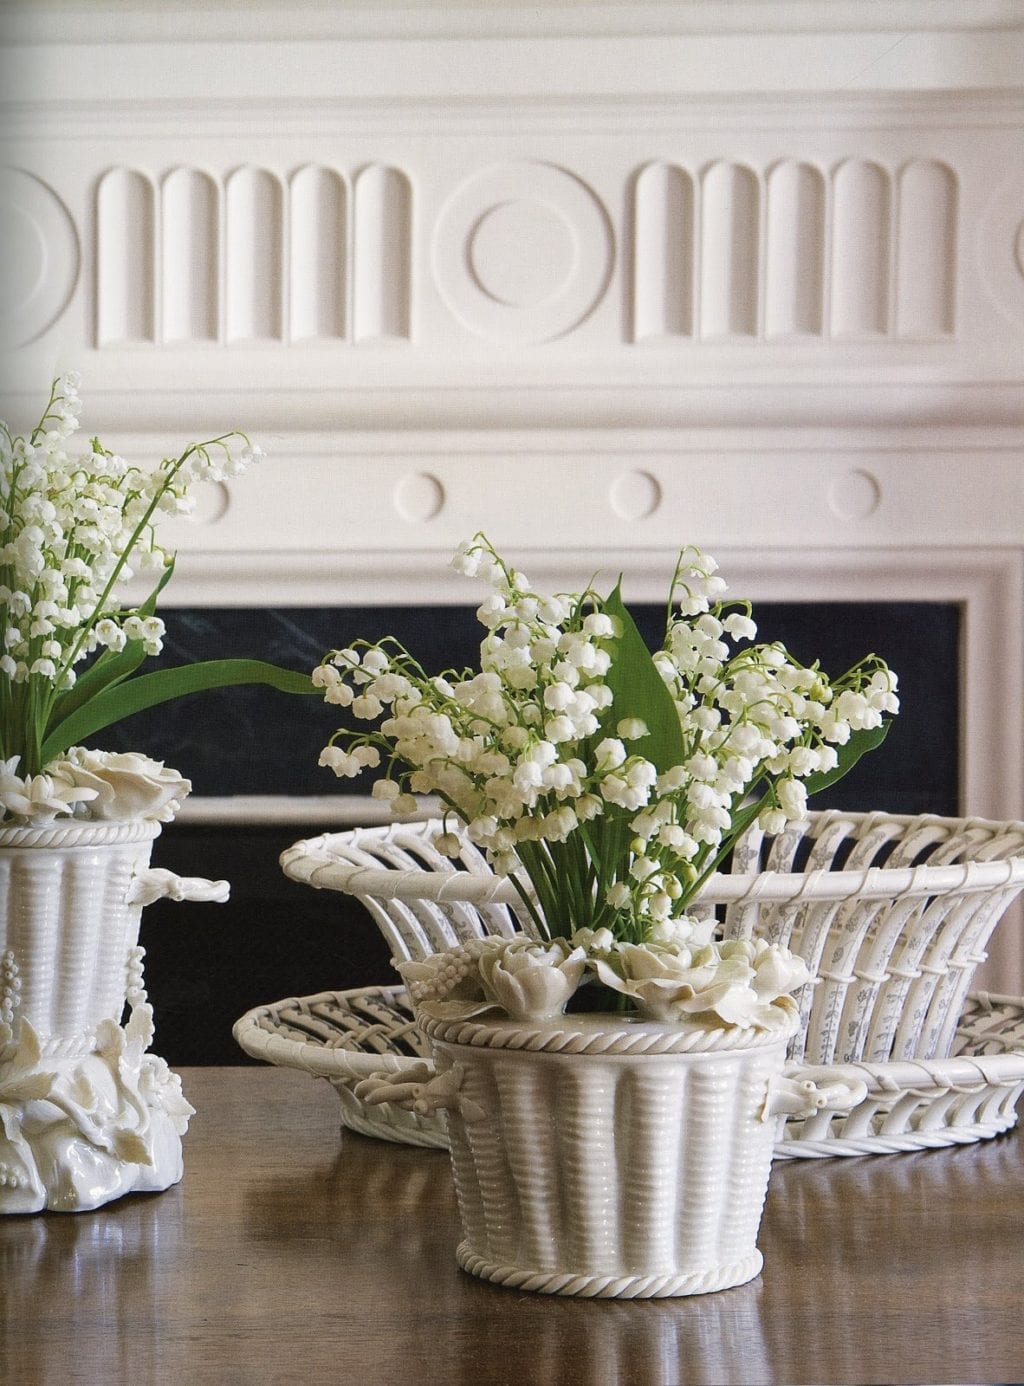 Happy Lily of the Valley Day! - The Glam Pad